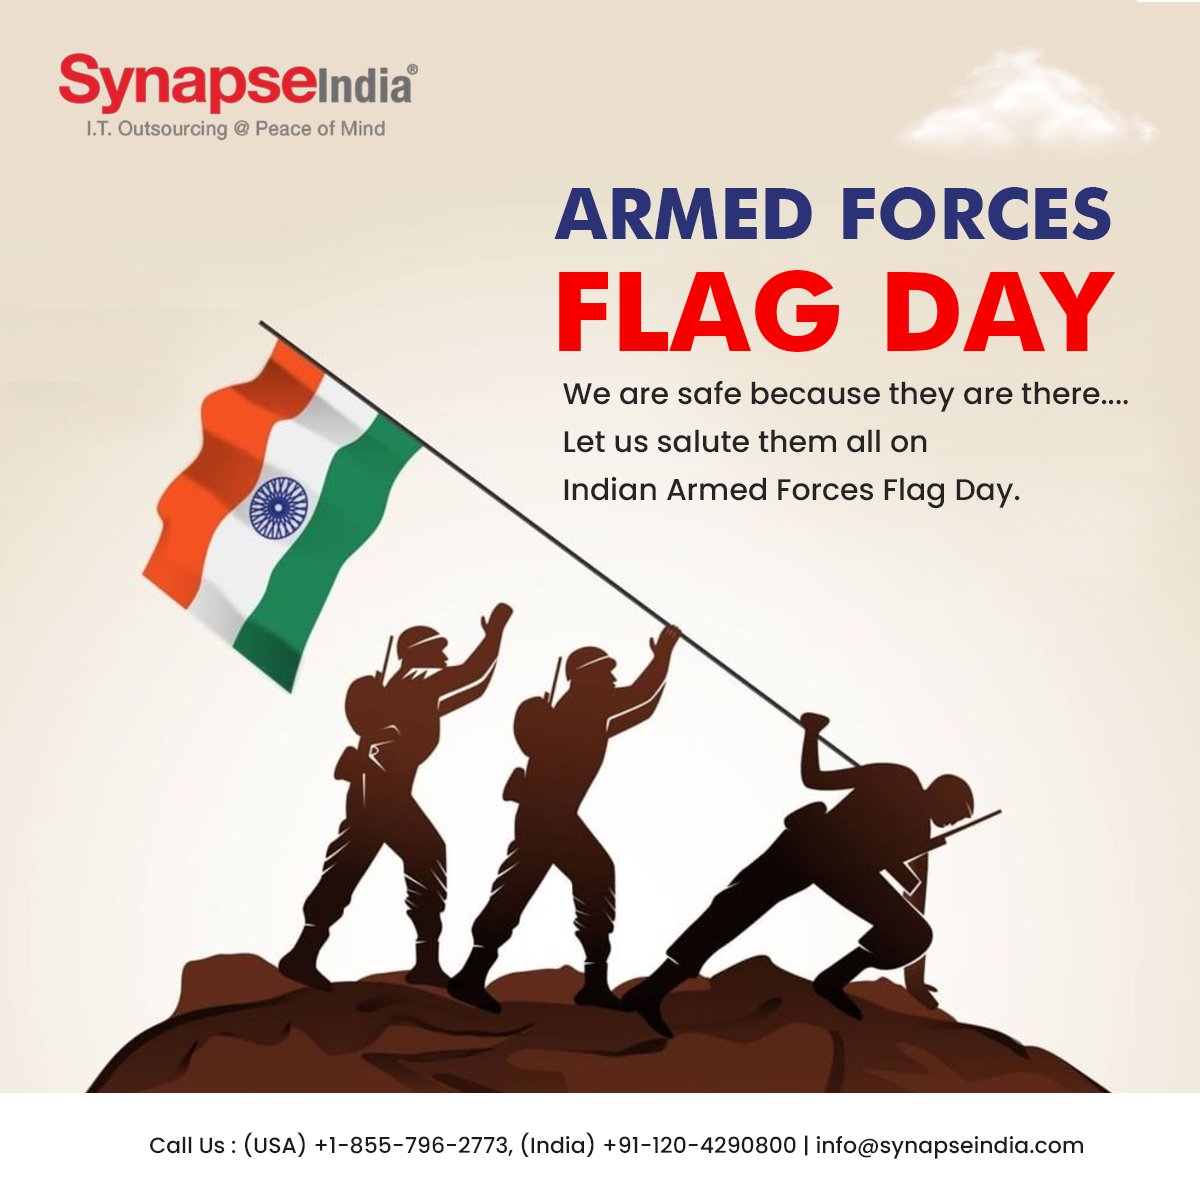 This Armed Forces Flag Day let’s salute the pride of our Nation's heroes and stand together to cheer their bravery and strength. 

#Armedflagday #SupportOurTroops #HonorOurHeroes #synapseindia